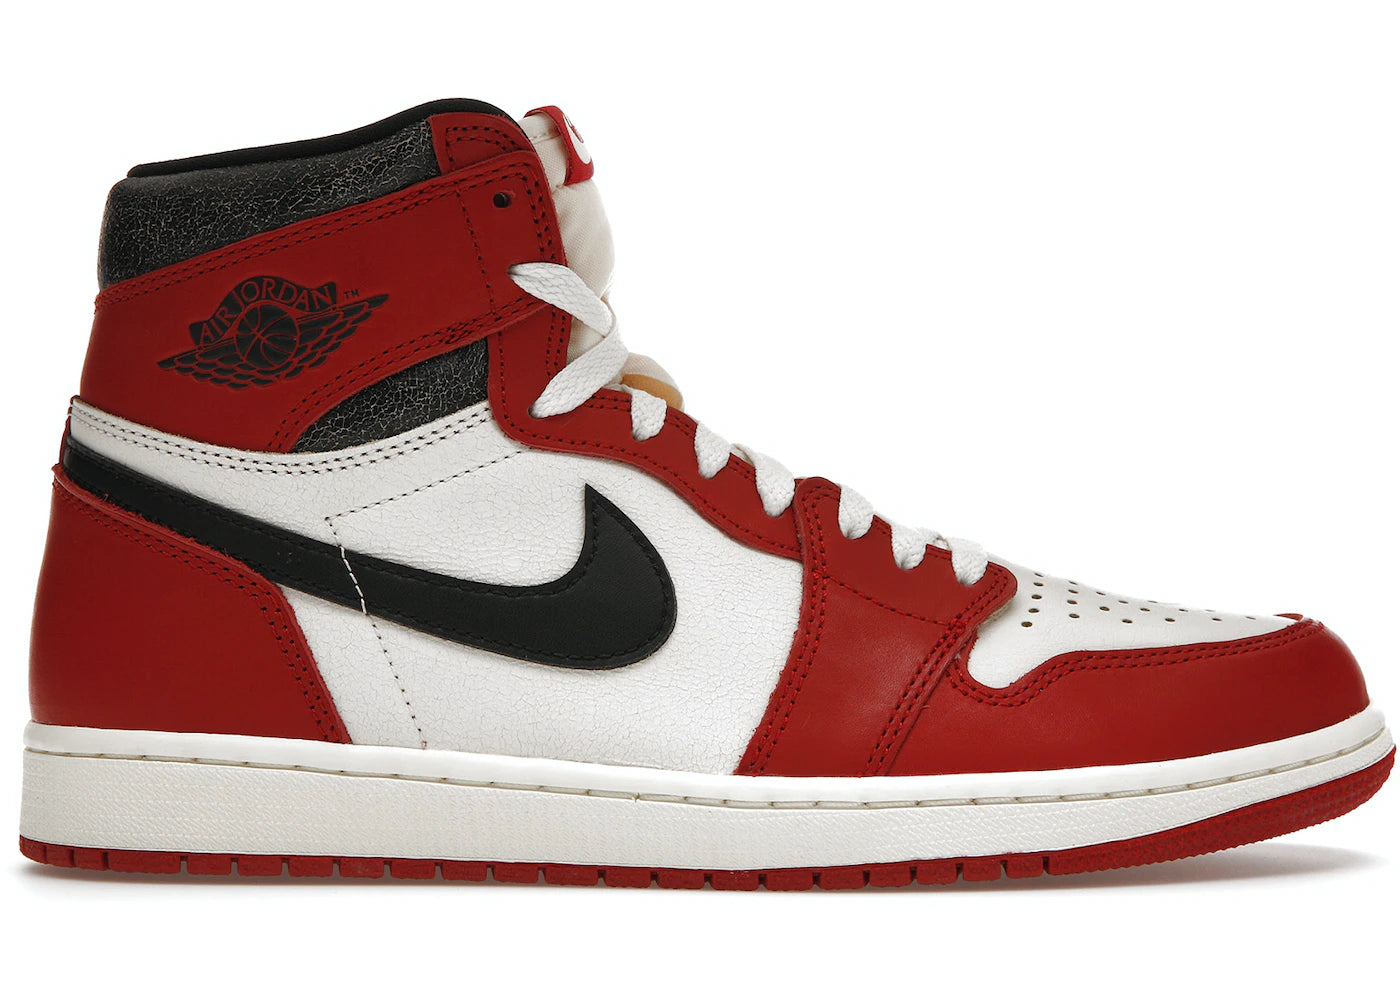 Jordan 1 Retro High OG Chicago Lost and Found - WORLDOFSHOES